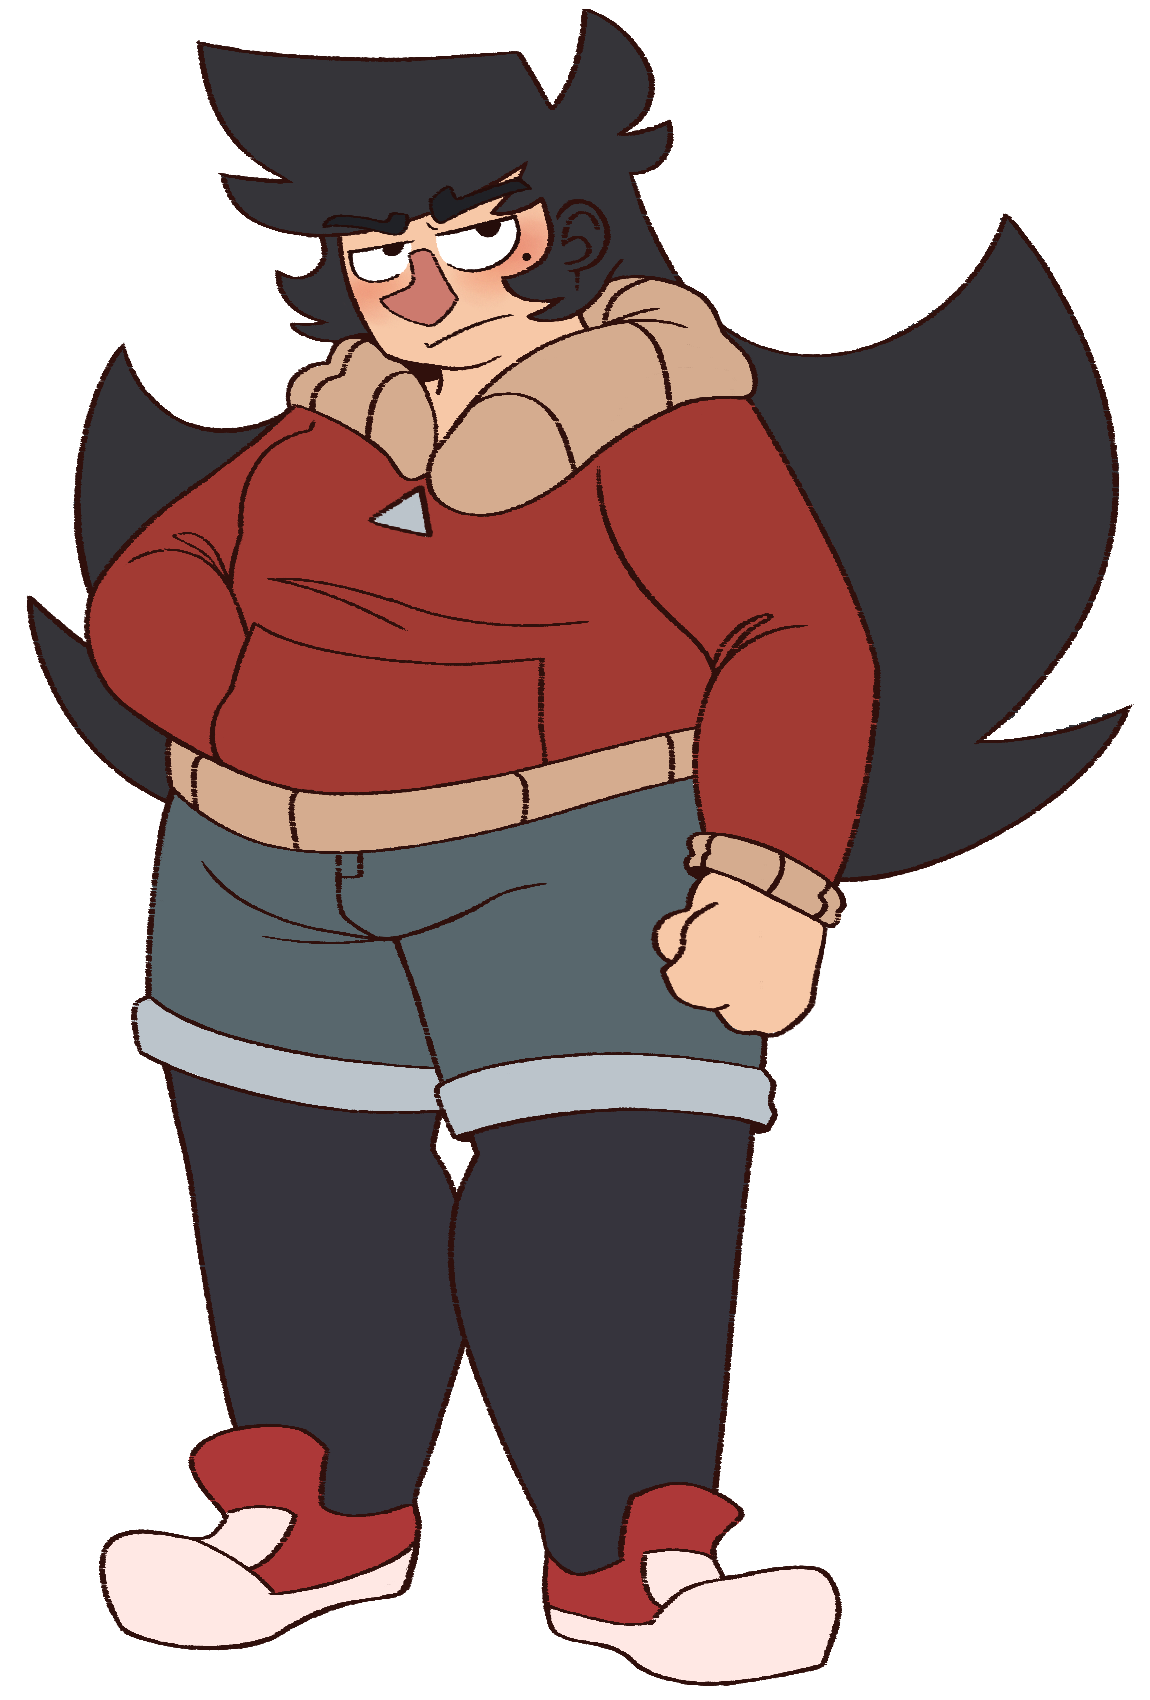 A fullbody drawing of Holly; she has long black hair and wears a red jacket, jean shorts, and black tights. She has an angry expression on her face.